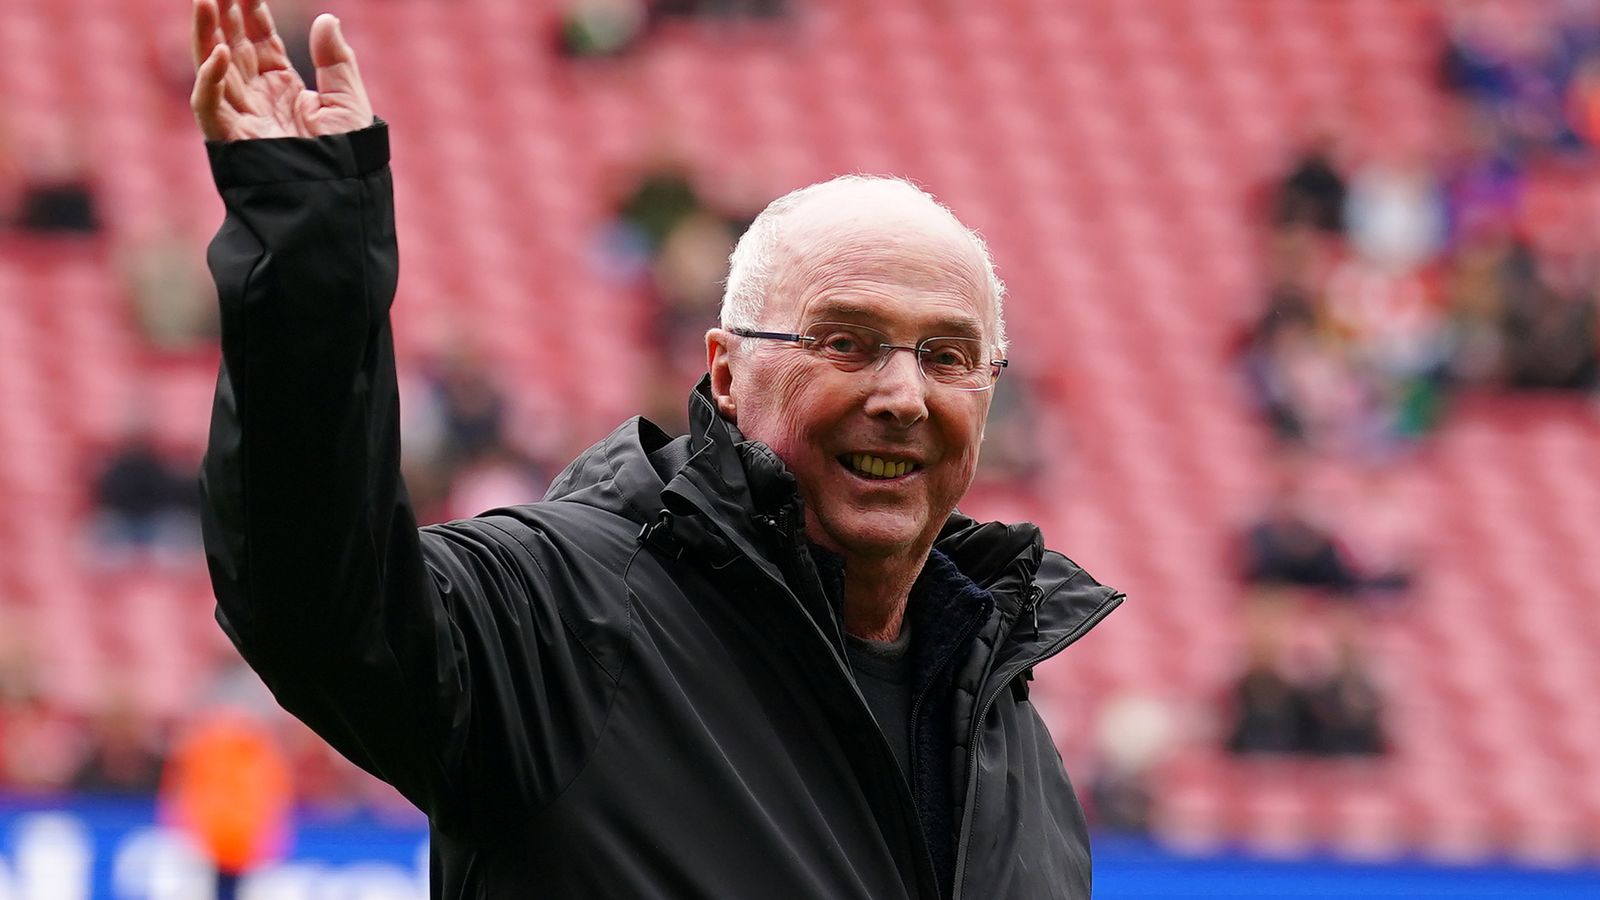 Sven-Goran Eriksson 'in tears' as he fulfils dying wish of managing Liverpool